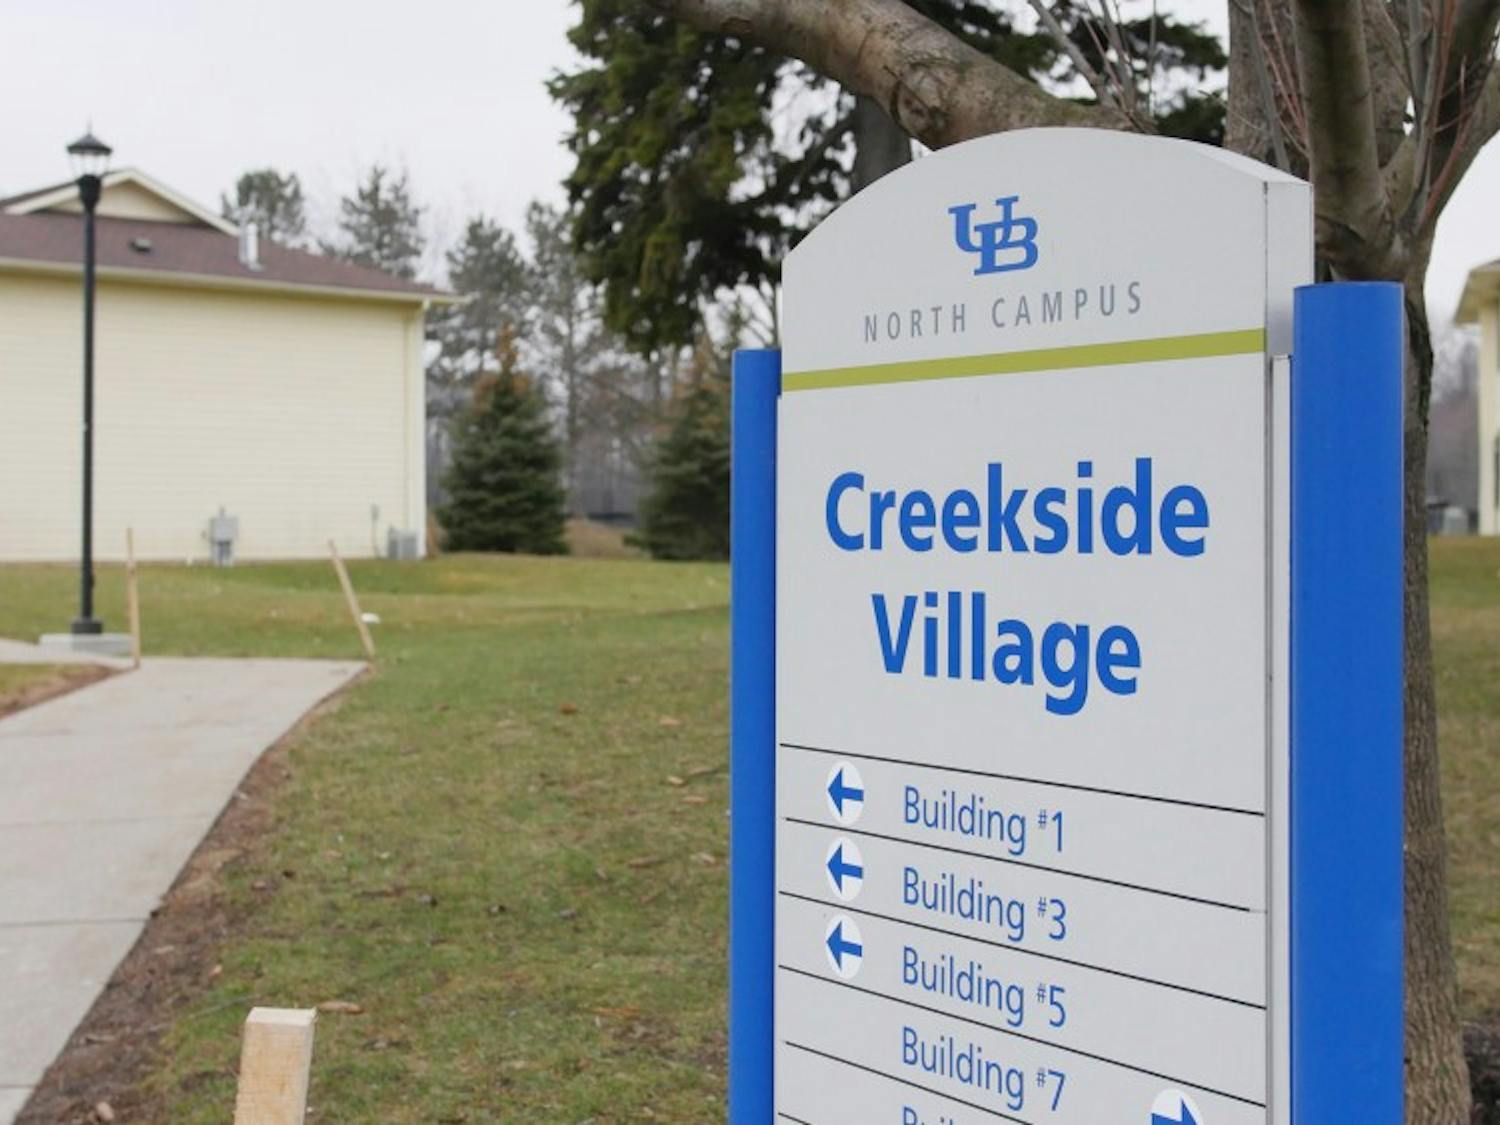 Sophomores are satisfied with the recent change to Creekside Village and Campus Living allowing them to live in an on-campus apartment.